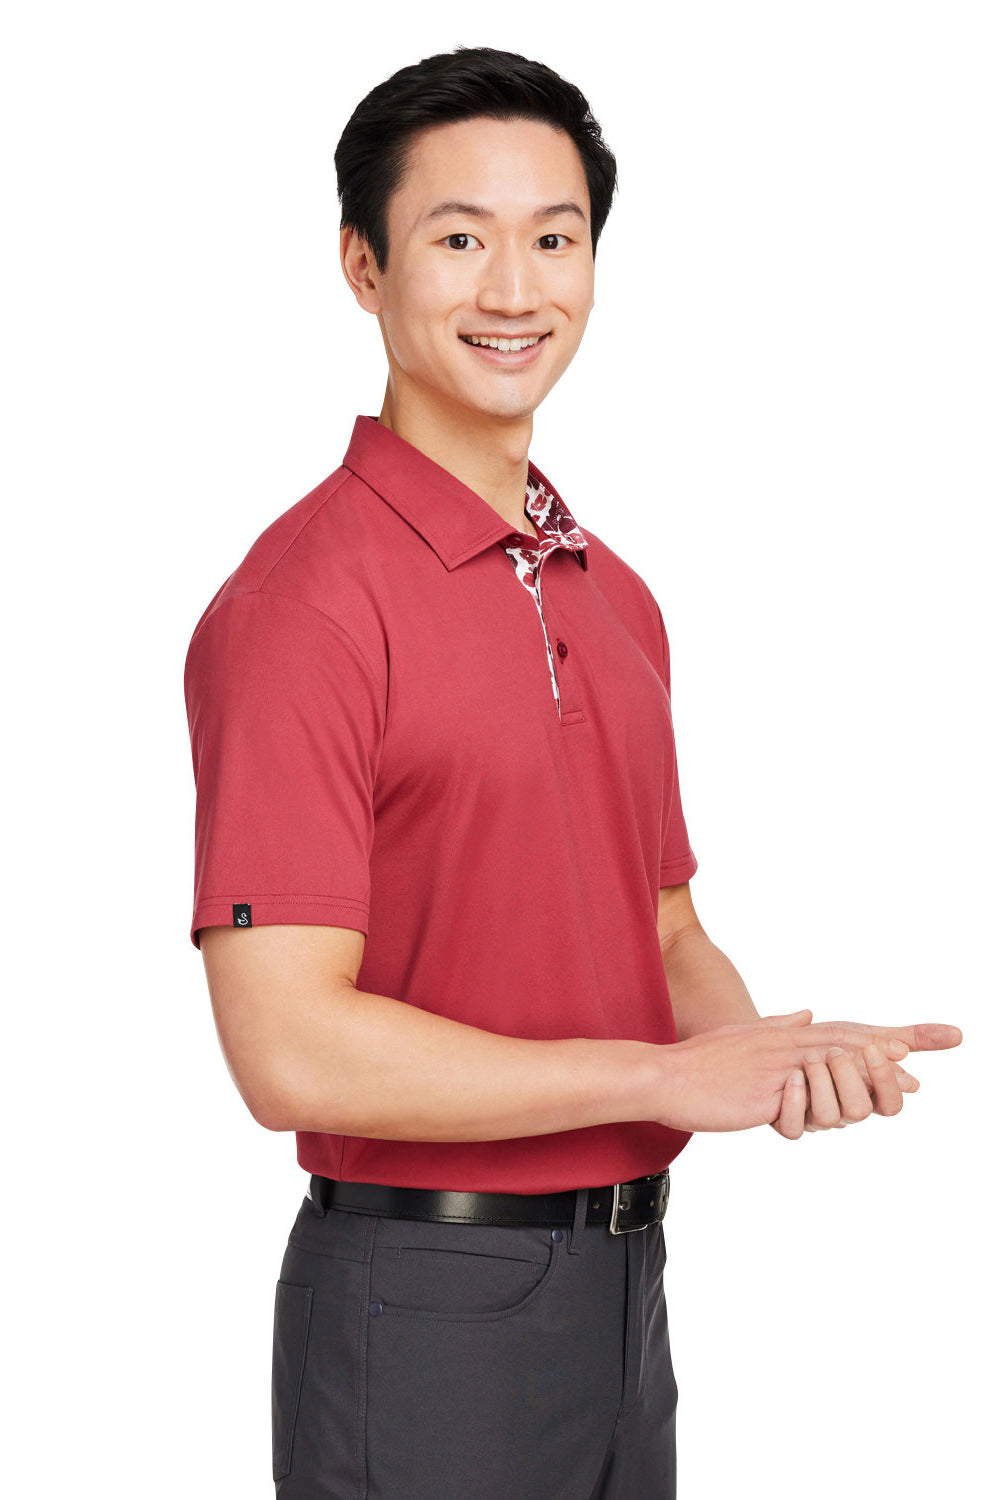 Swannies Golf SW2000 Mens James Short Sleeve Polo Shirt Heather Red 3Q